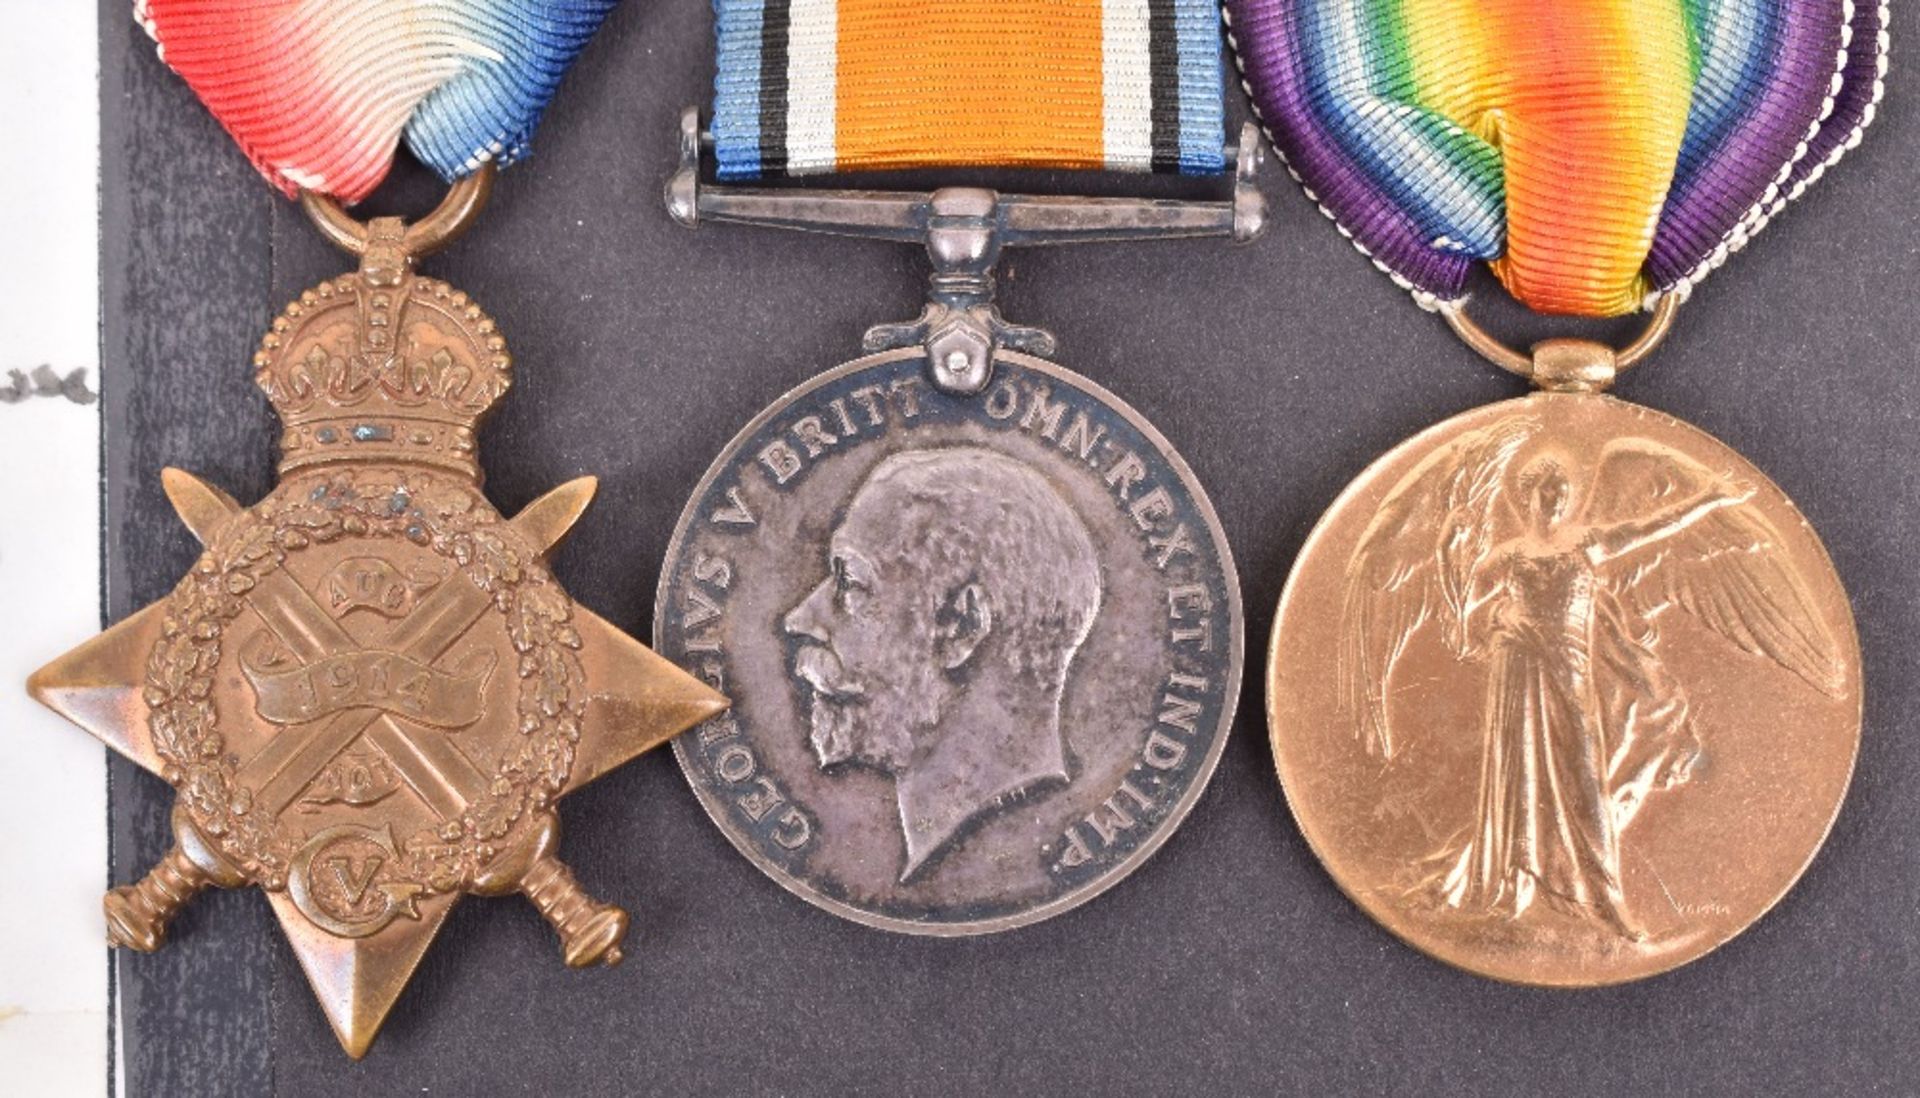 1914 “Mons” Star and Bar Medal Trio 1st Battalion Wiltshire Regiment - Image 2 of 4